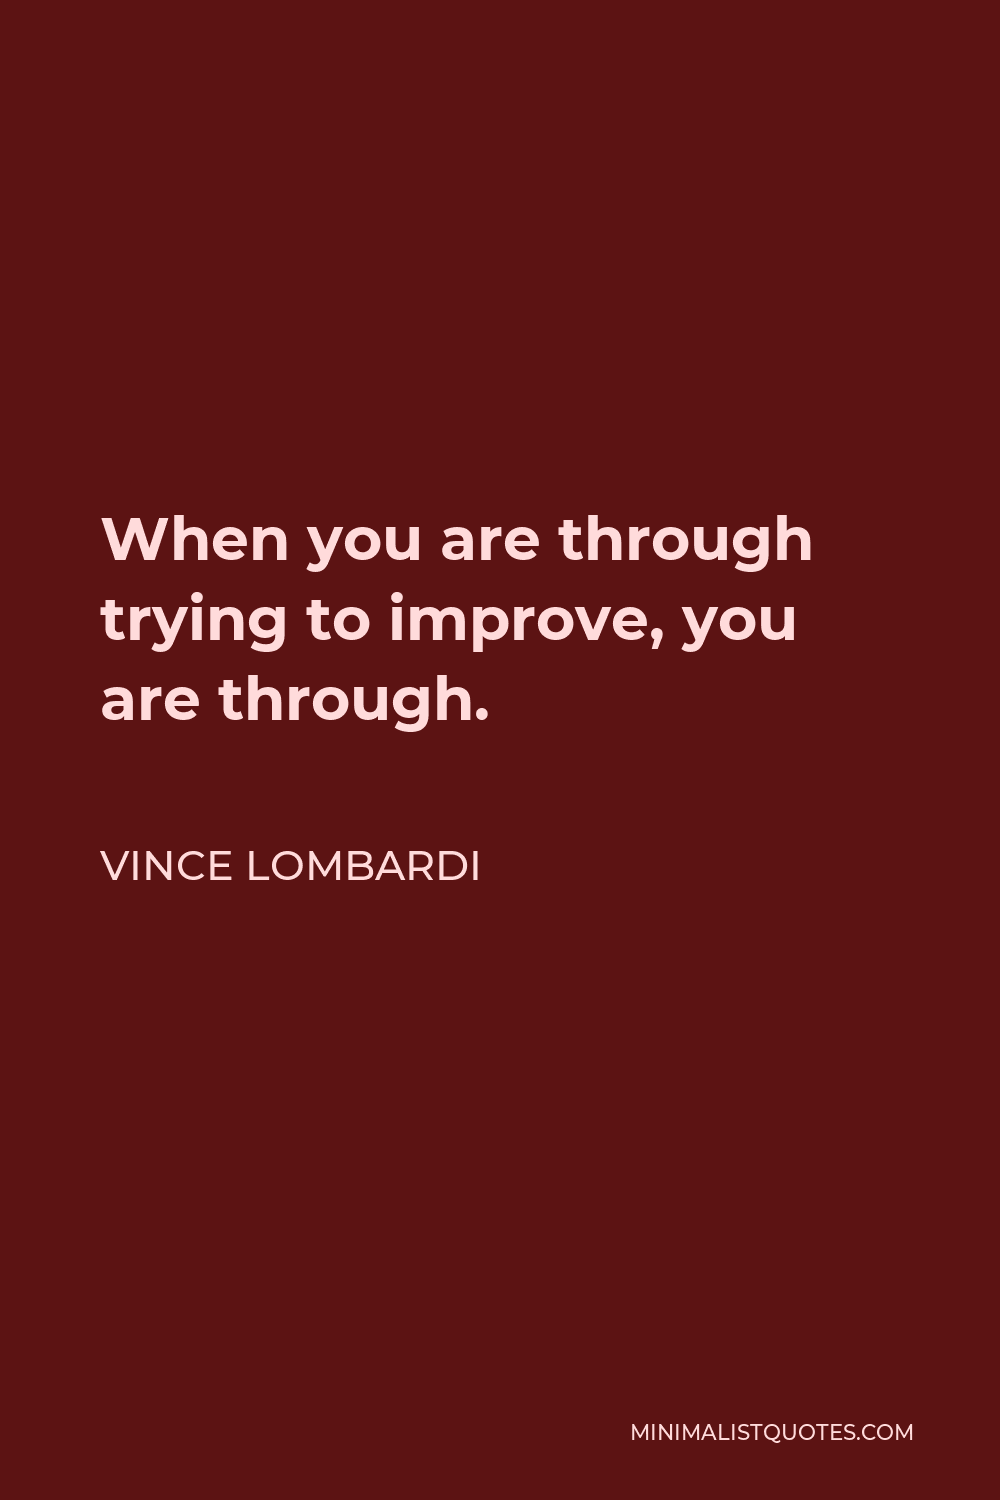 Vince Lombardi Quote - When you are through trying to improve, you are through.